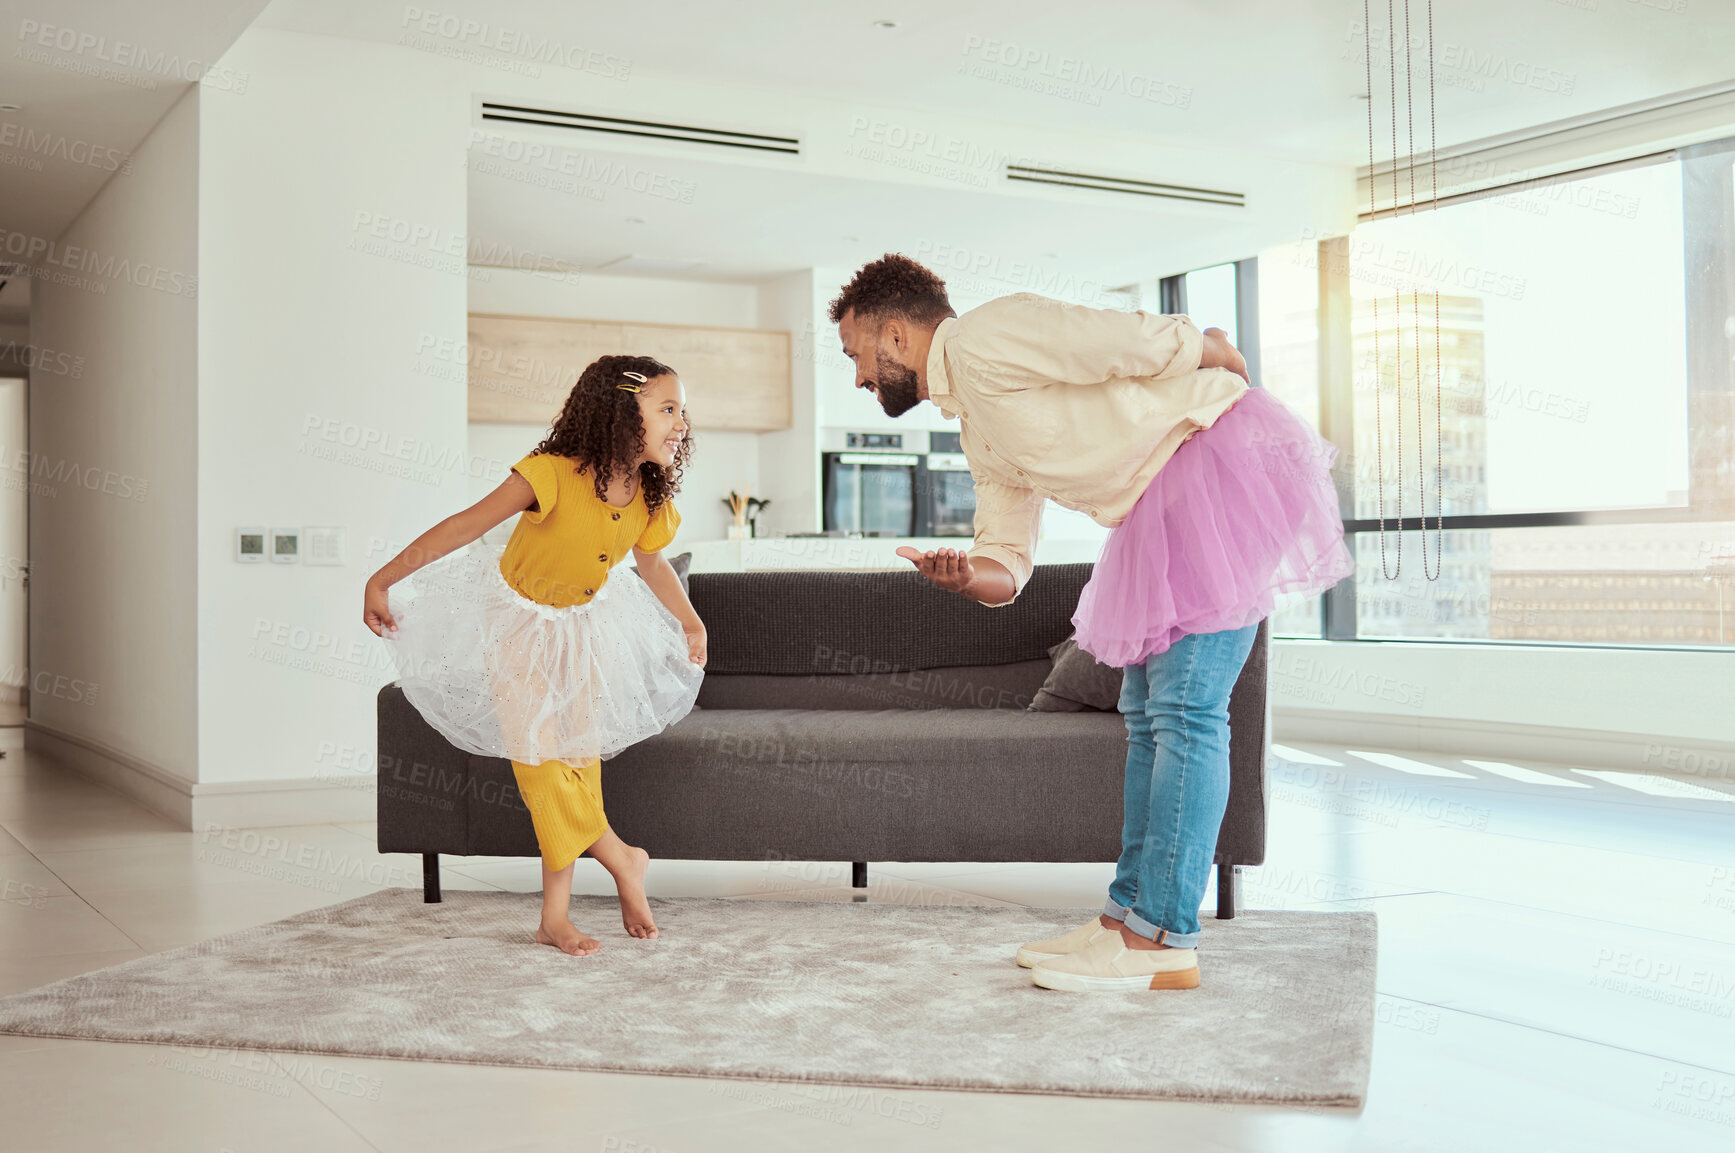 Buy stock photo Full length mixed race single father dancing with adorable daughter in living room at home. Cute little hispanic girl wearing tutus with single parent and bonding in lounge. Man and child together